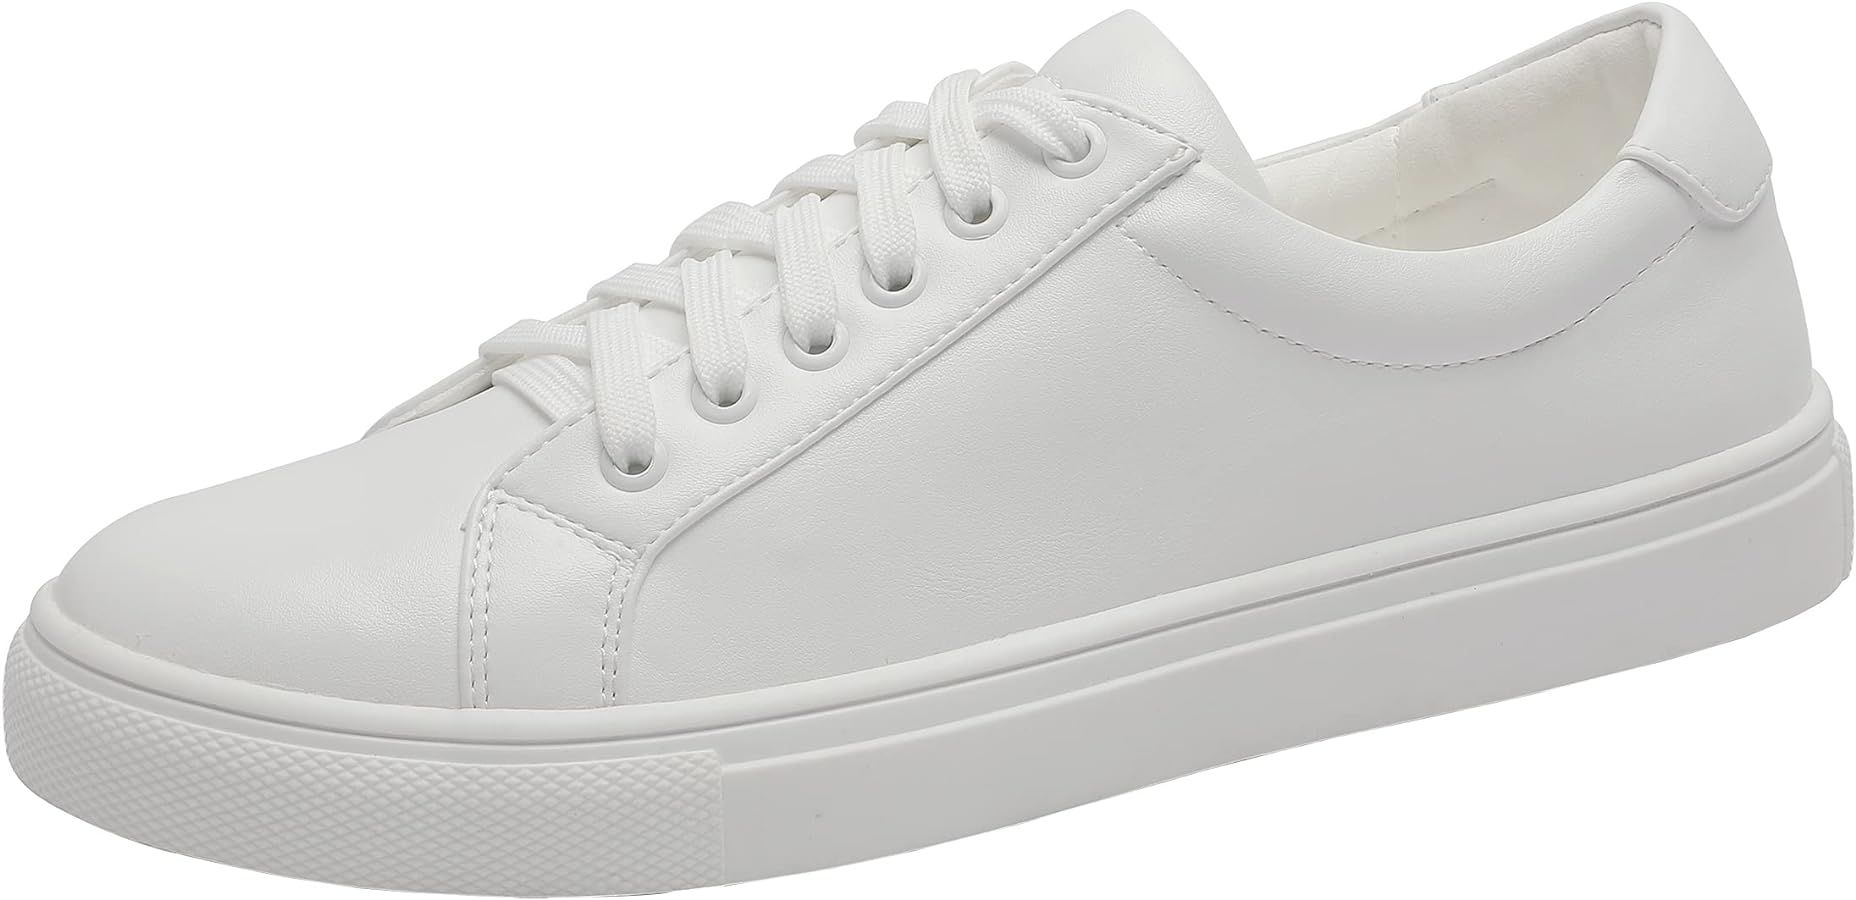 YZ Classic White Sneakers for Women PU Leather Tennis Shoes Low Top Casual Shoes | Amazon (US)